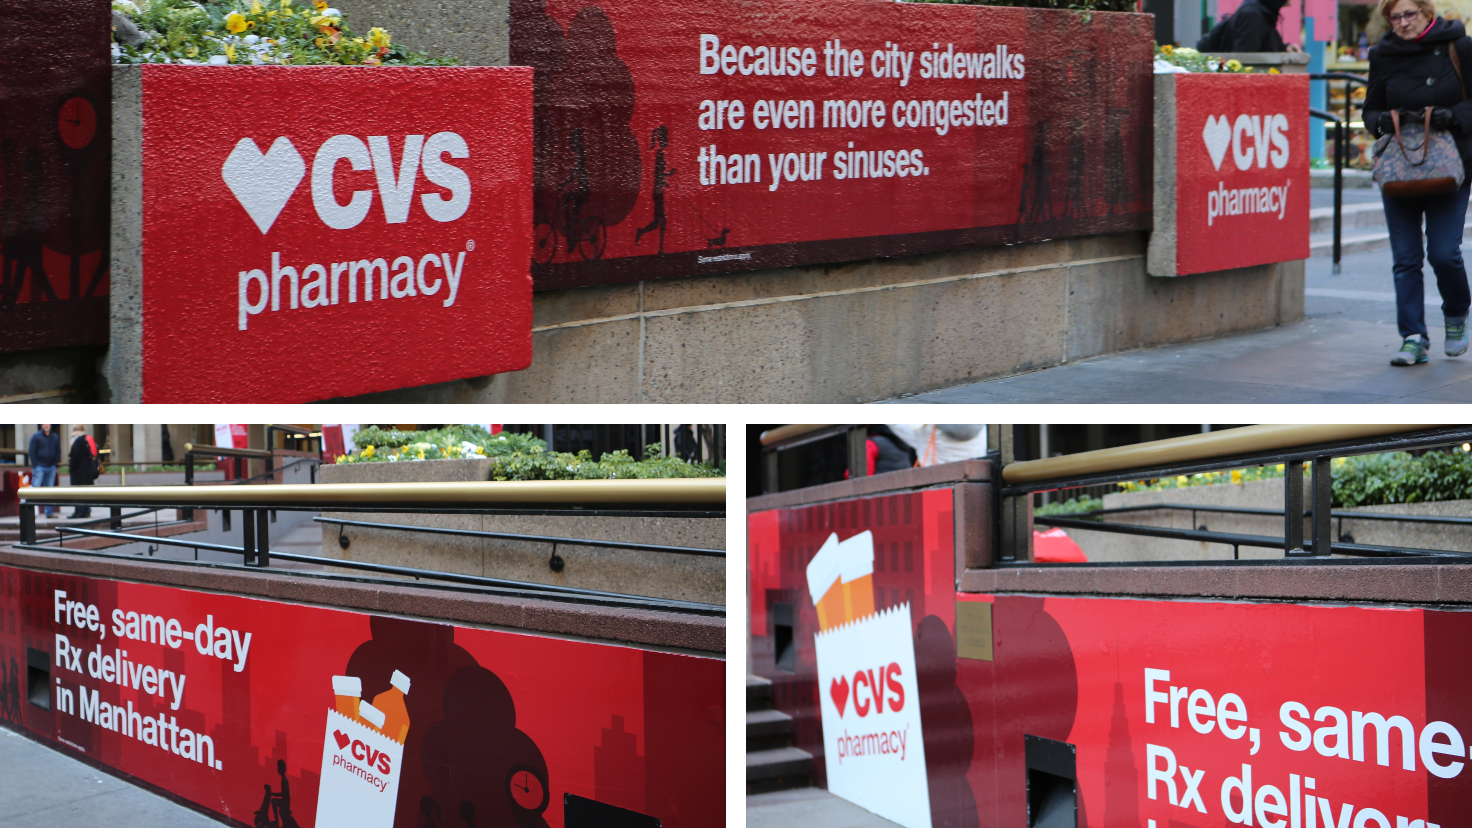 Our work for CVS Pharmacy displayed.